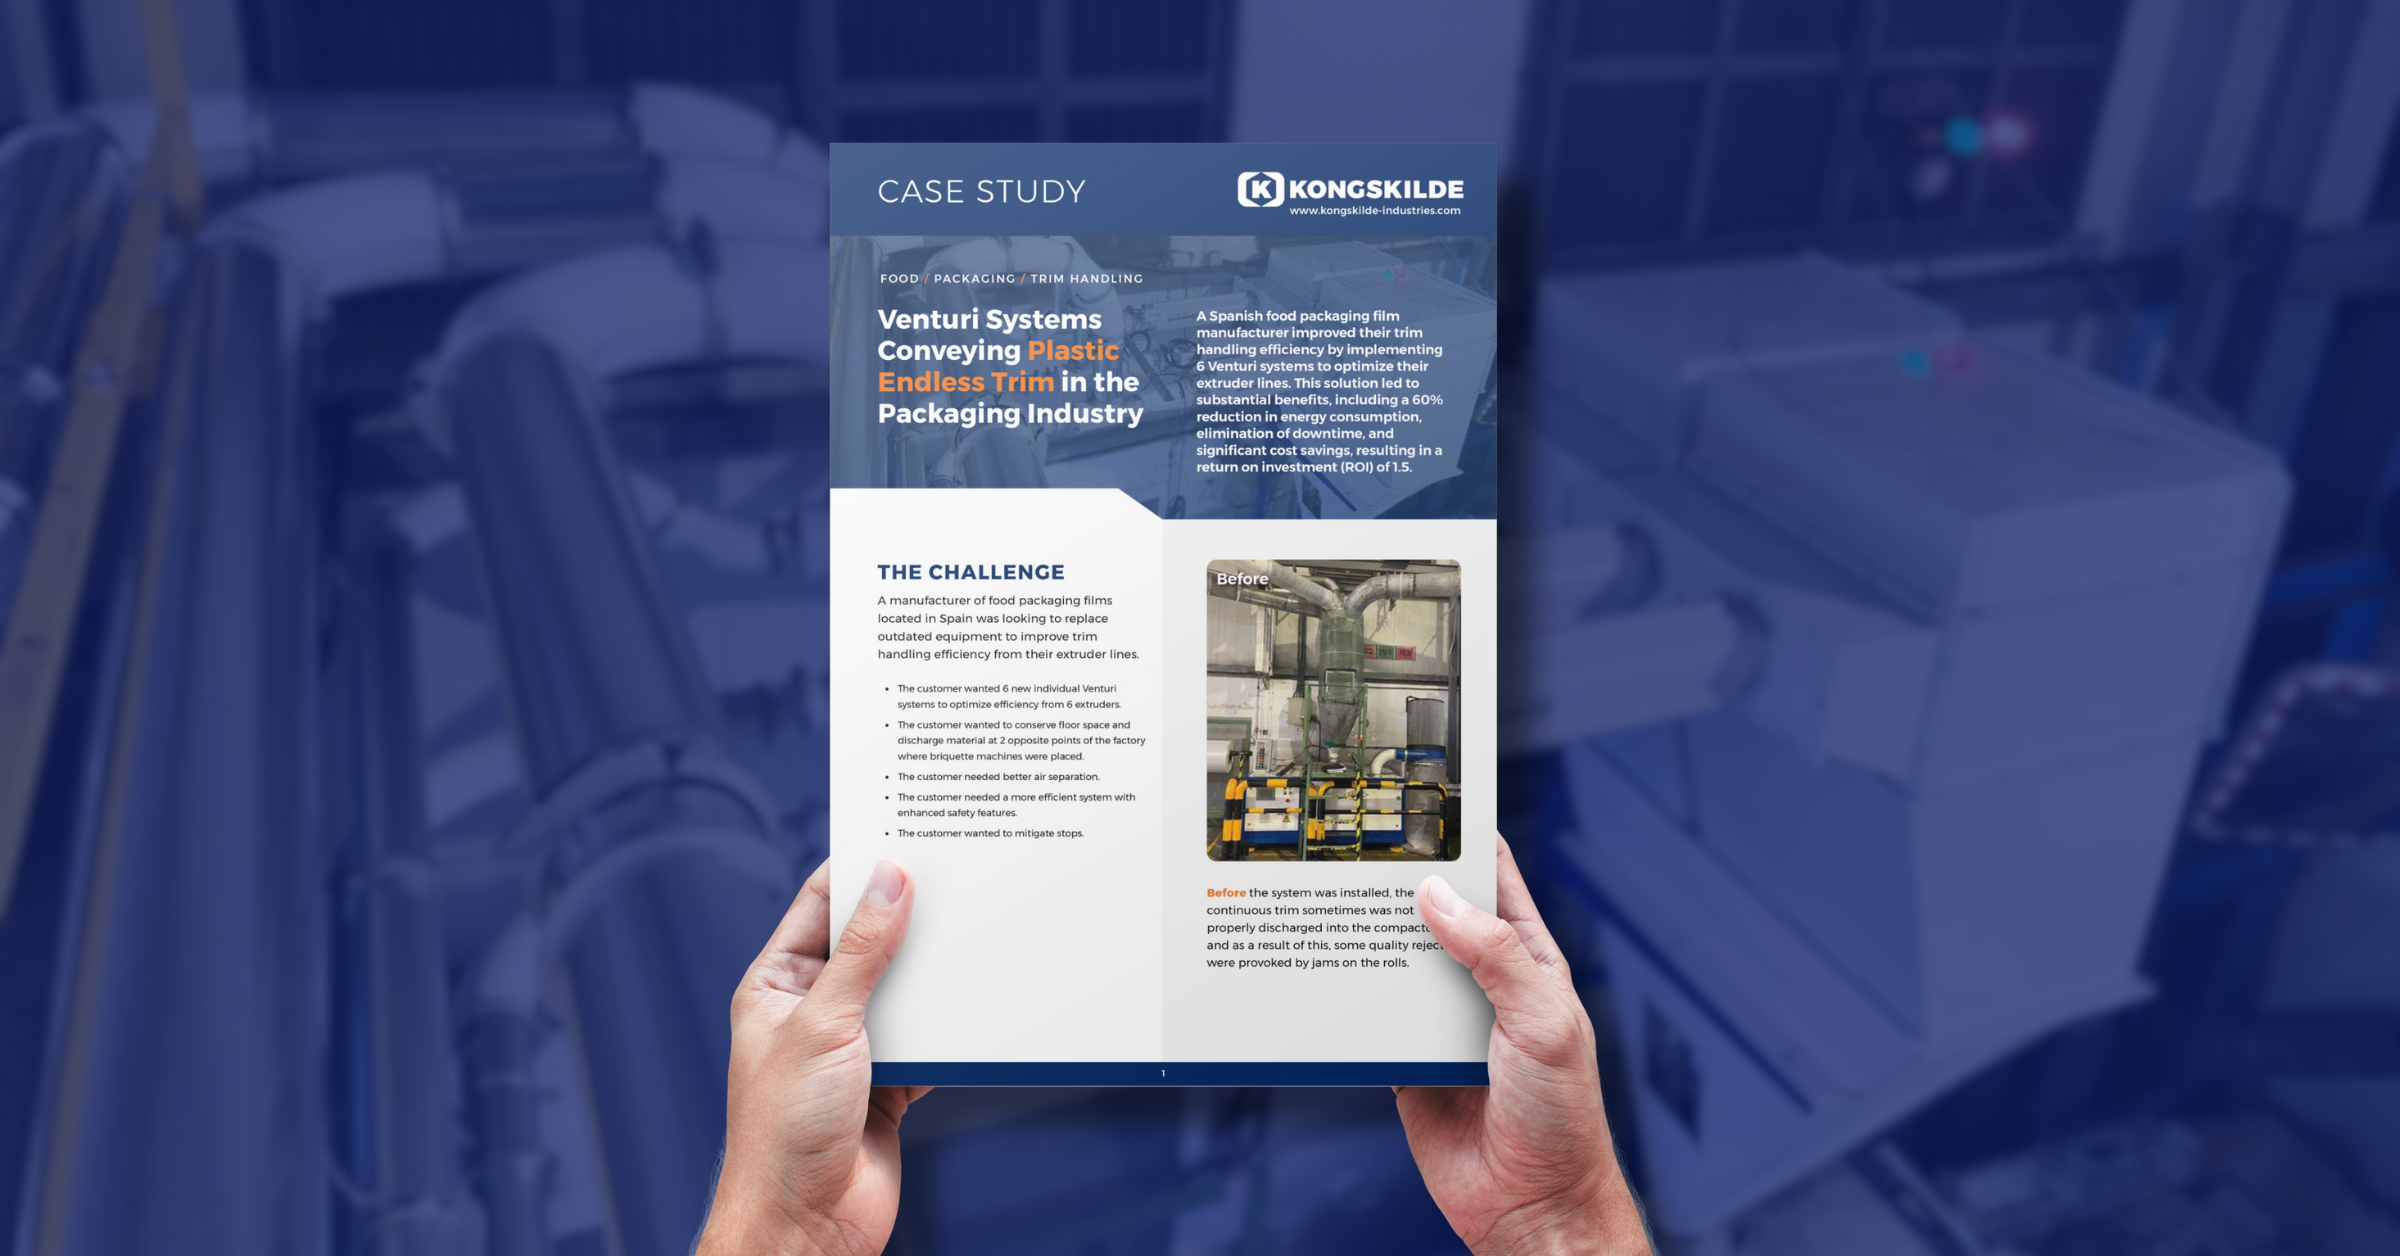 New Case Study Now Available